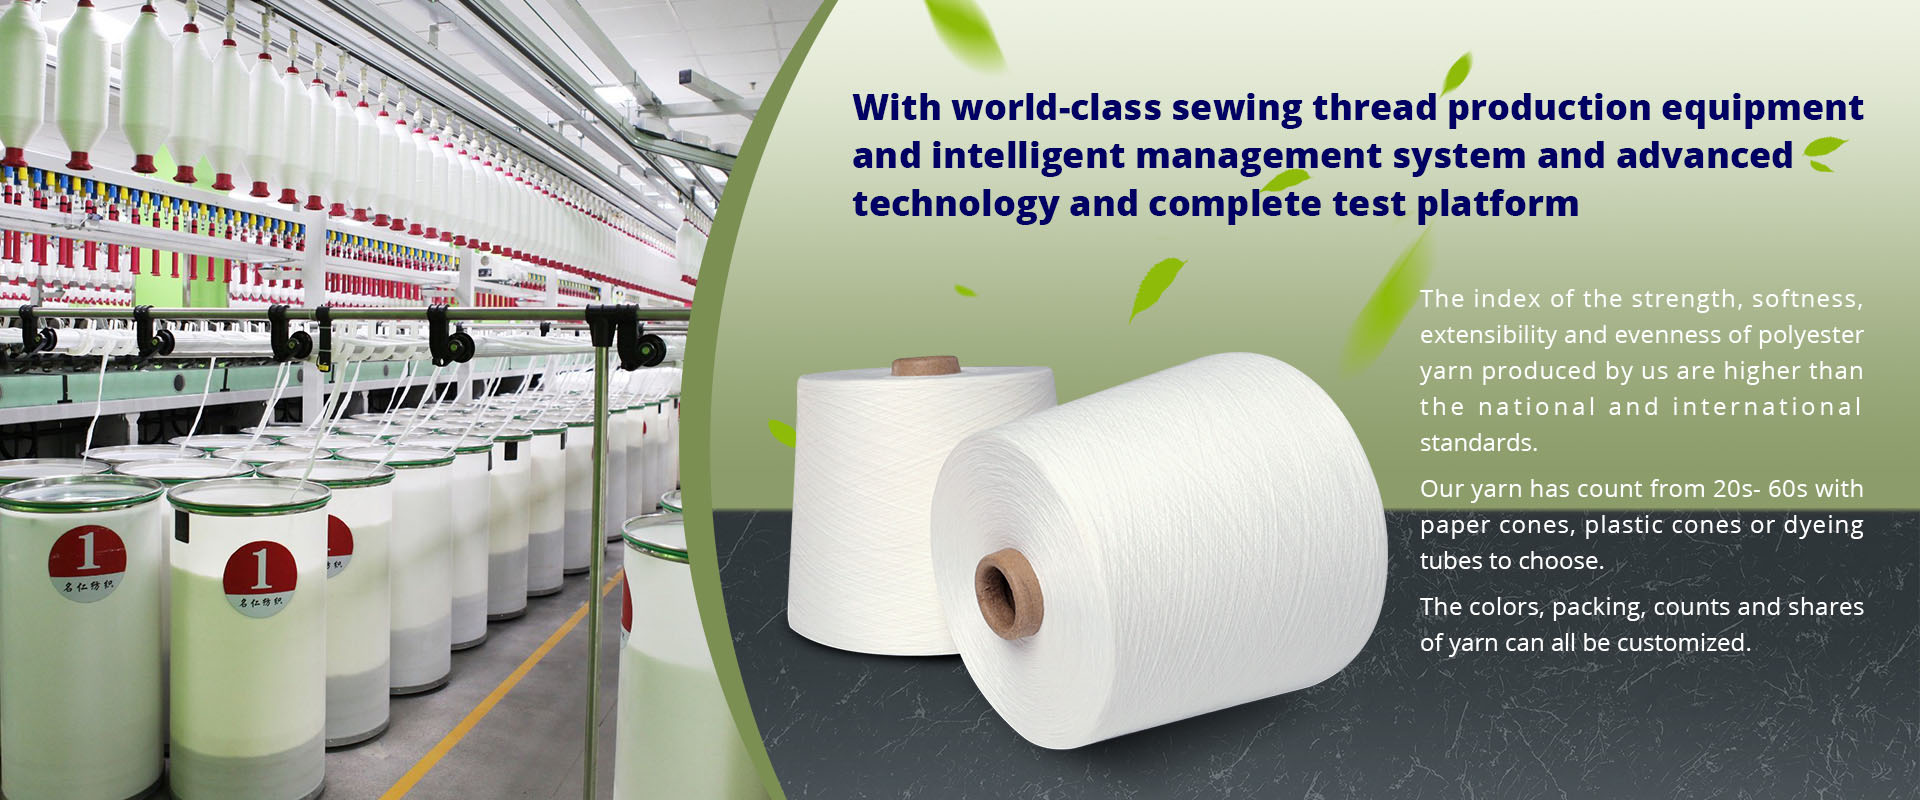 world-class polyester sewing thread